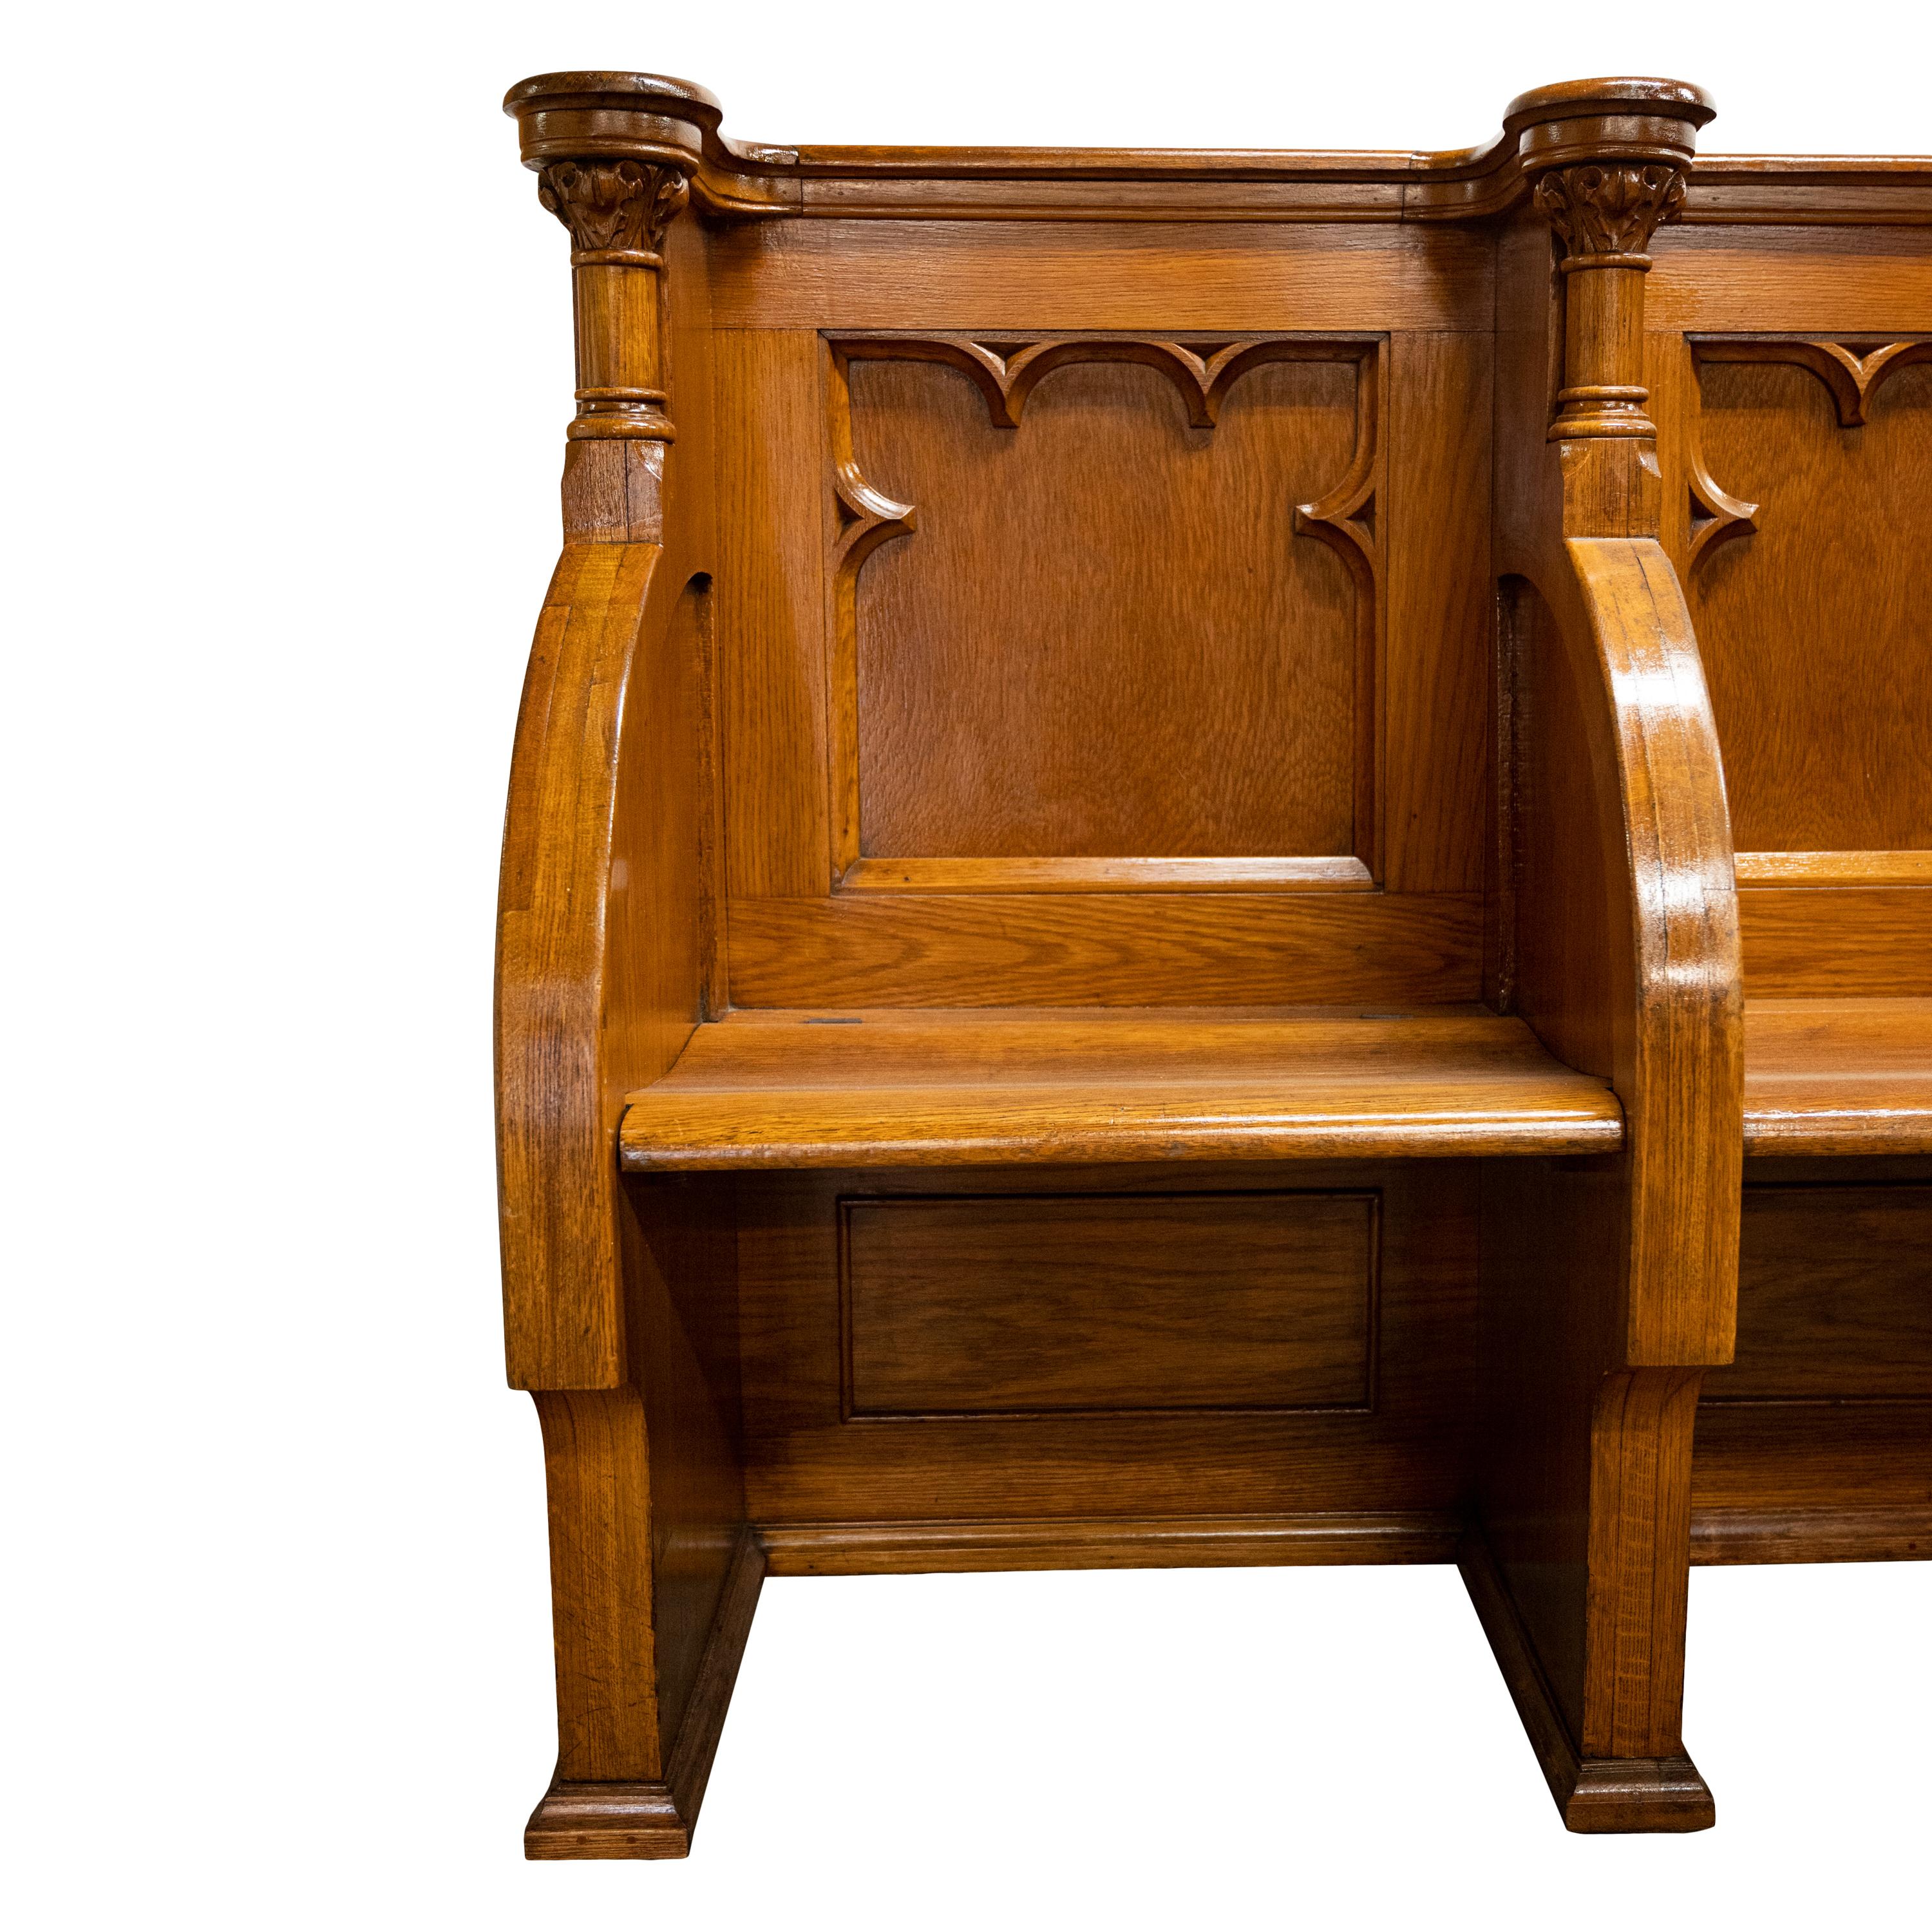 Antique Gothic Revival Pugin Carved Oak Church 3 Seat Pew Bench Choir Stall 1850 4